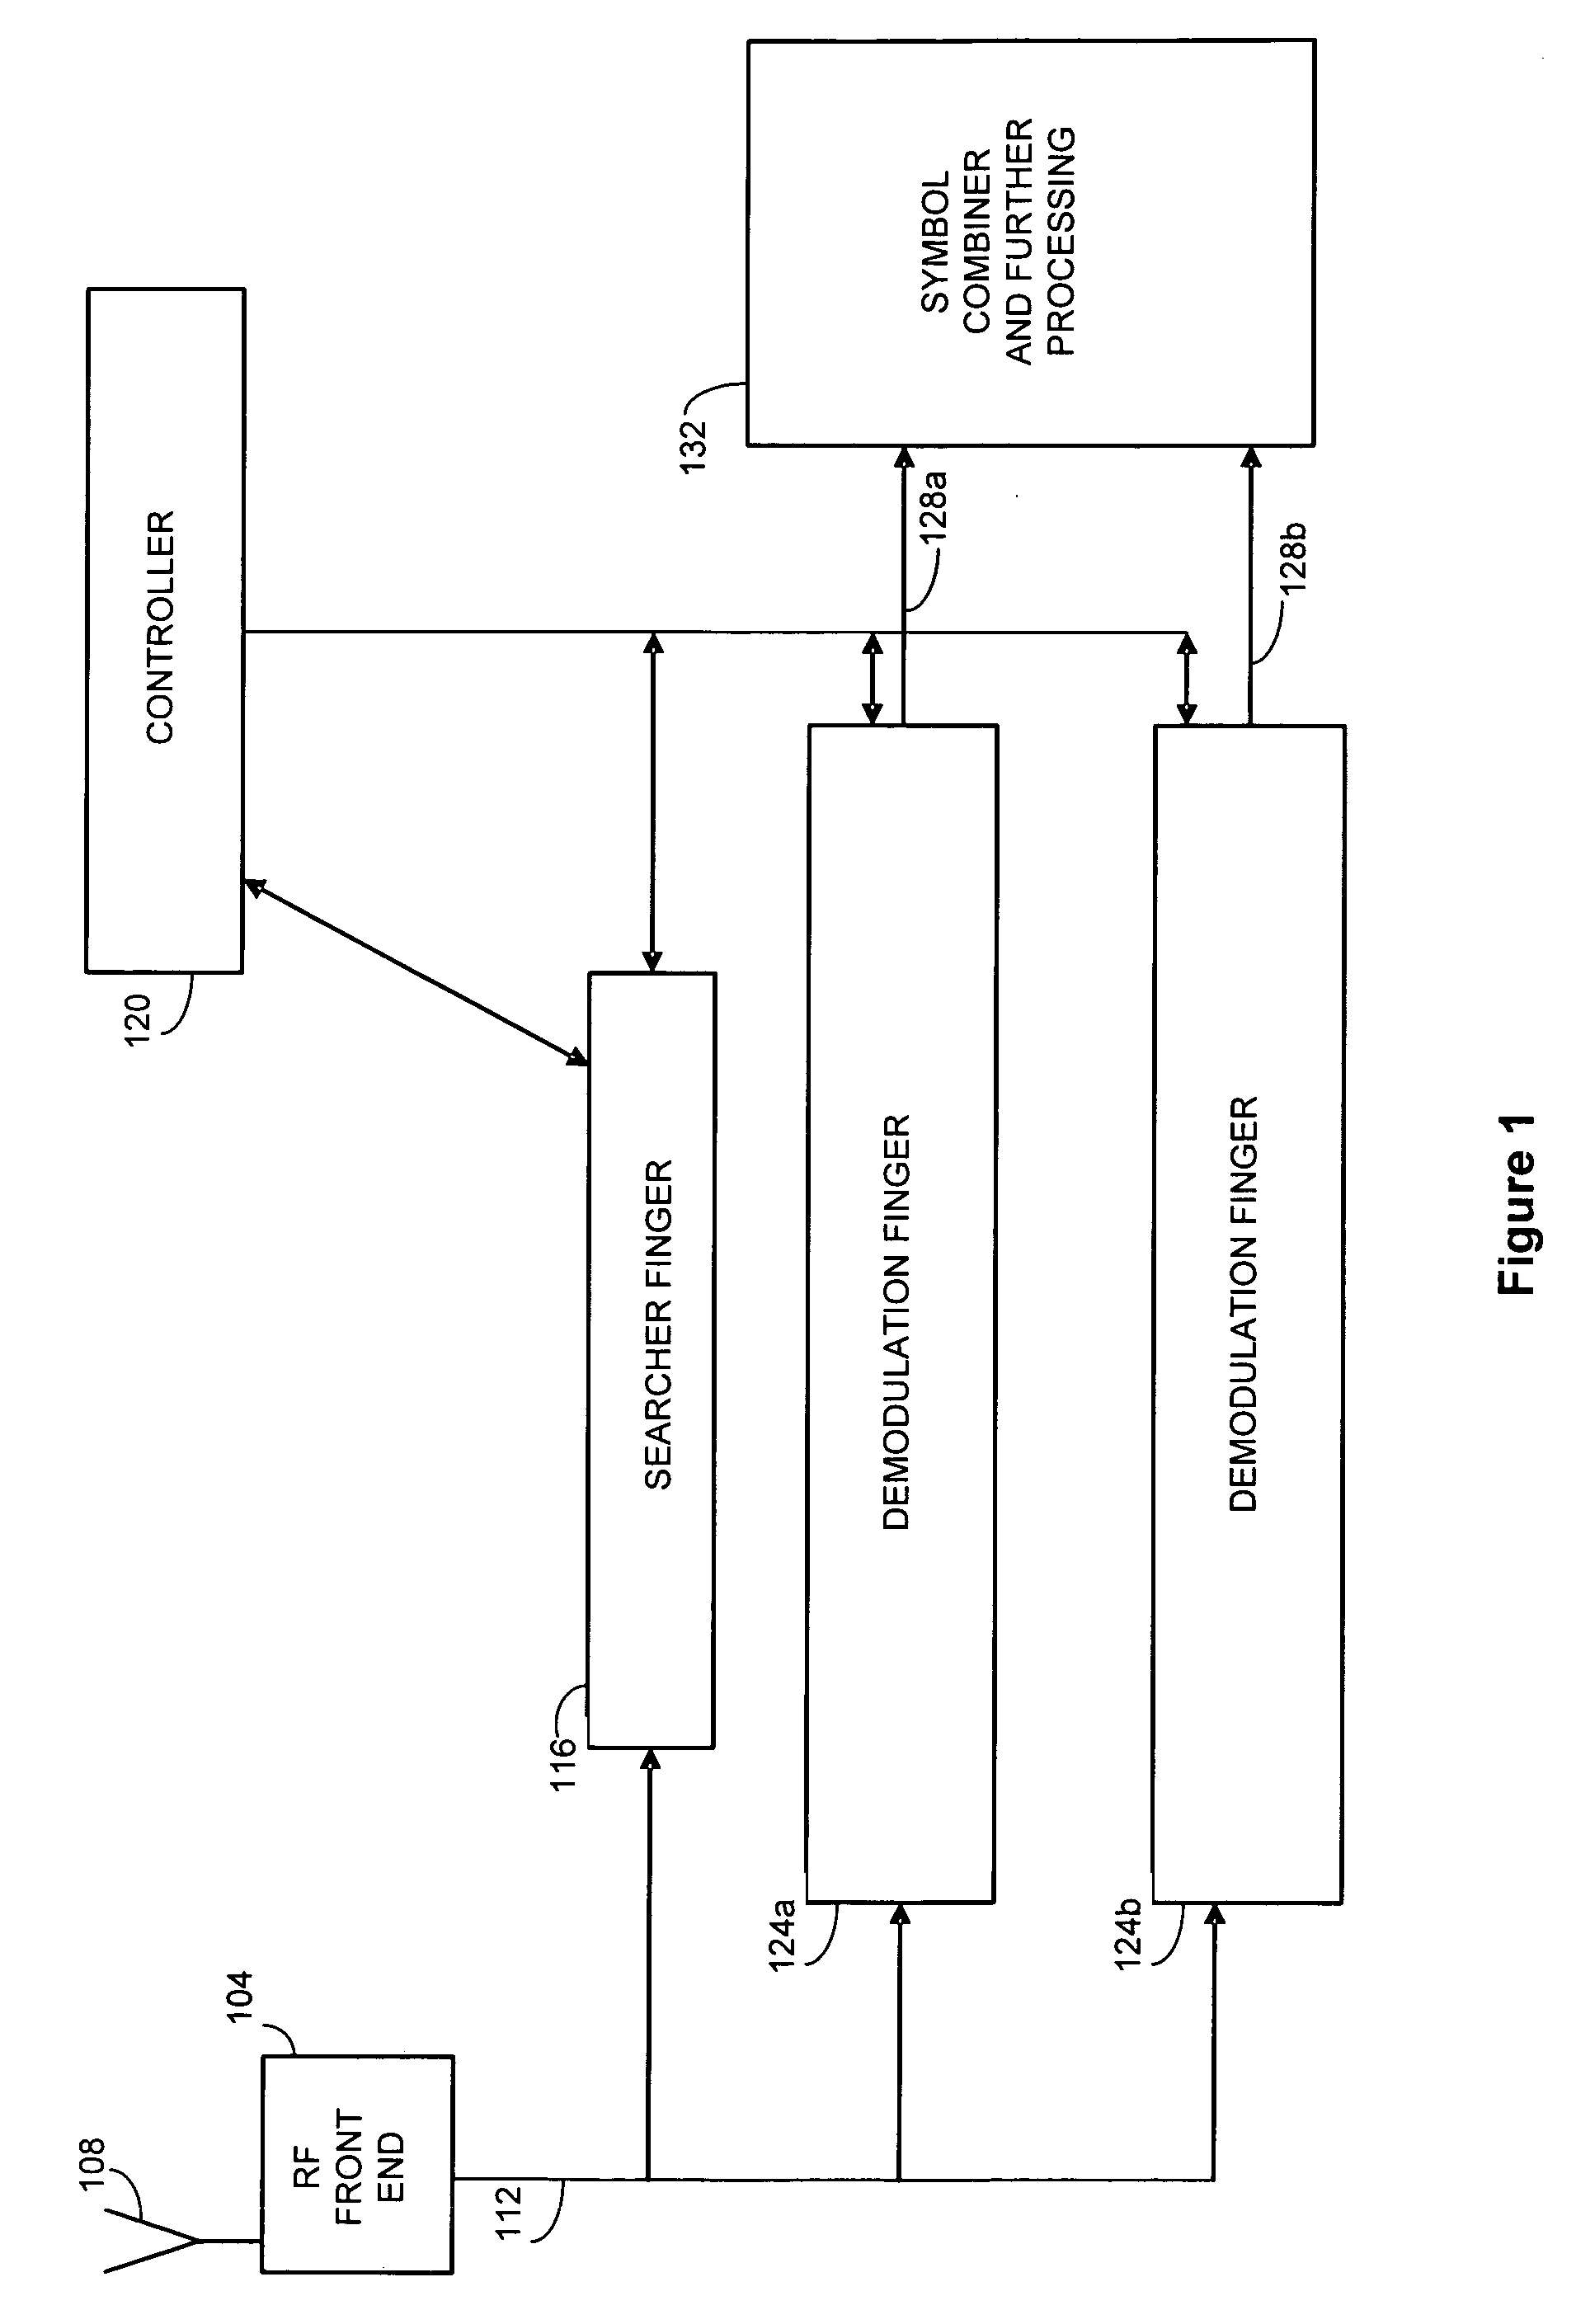 Method and apparatus for selectively applying interference cancellation in spread spectrum systems